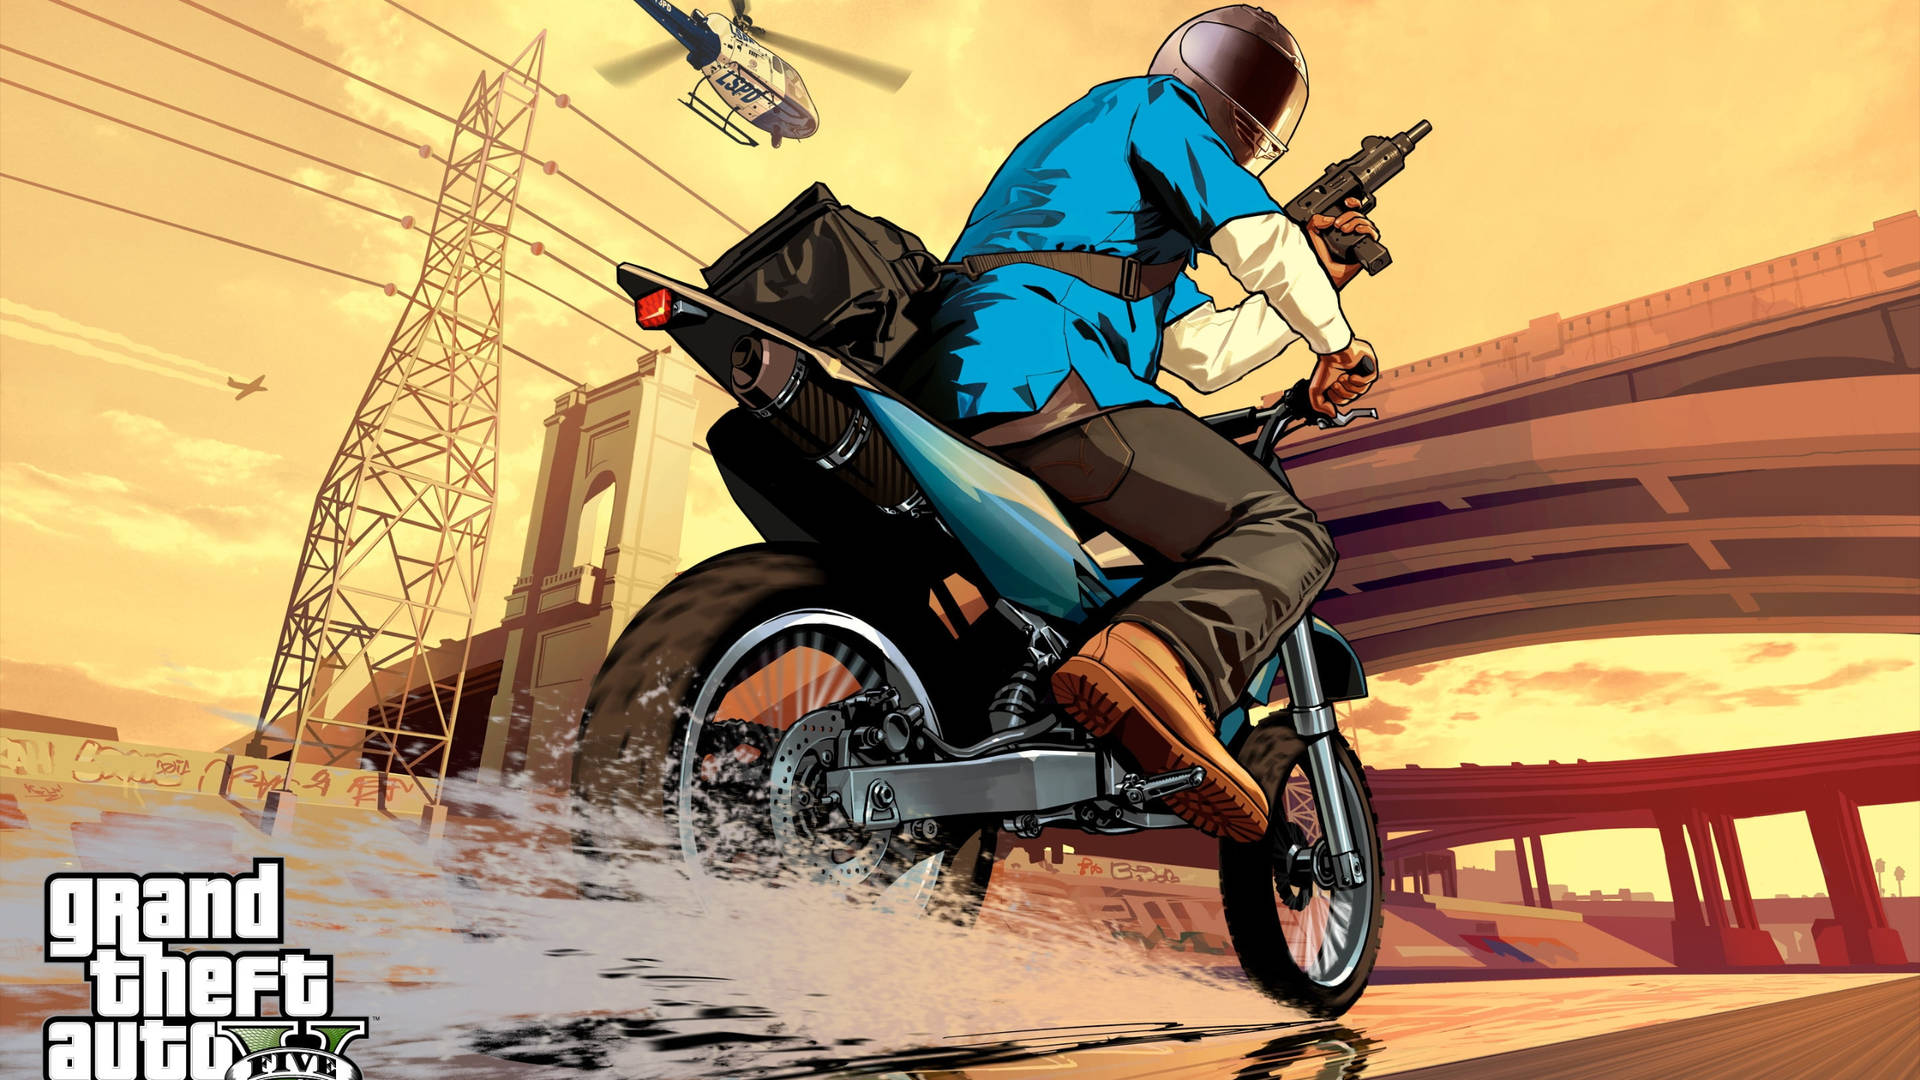 Grand Theft Auto Man Riding Motorcycle Wallpaper